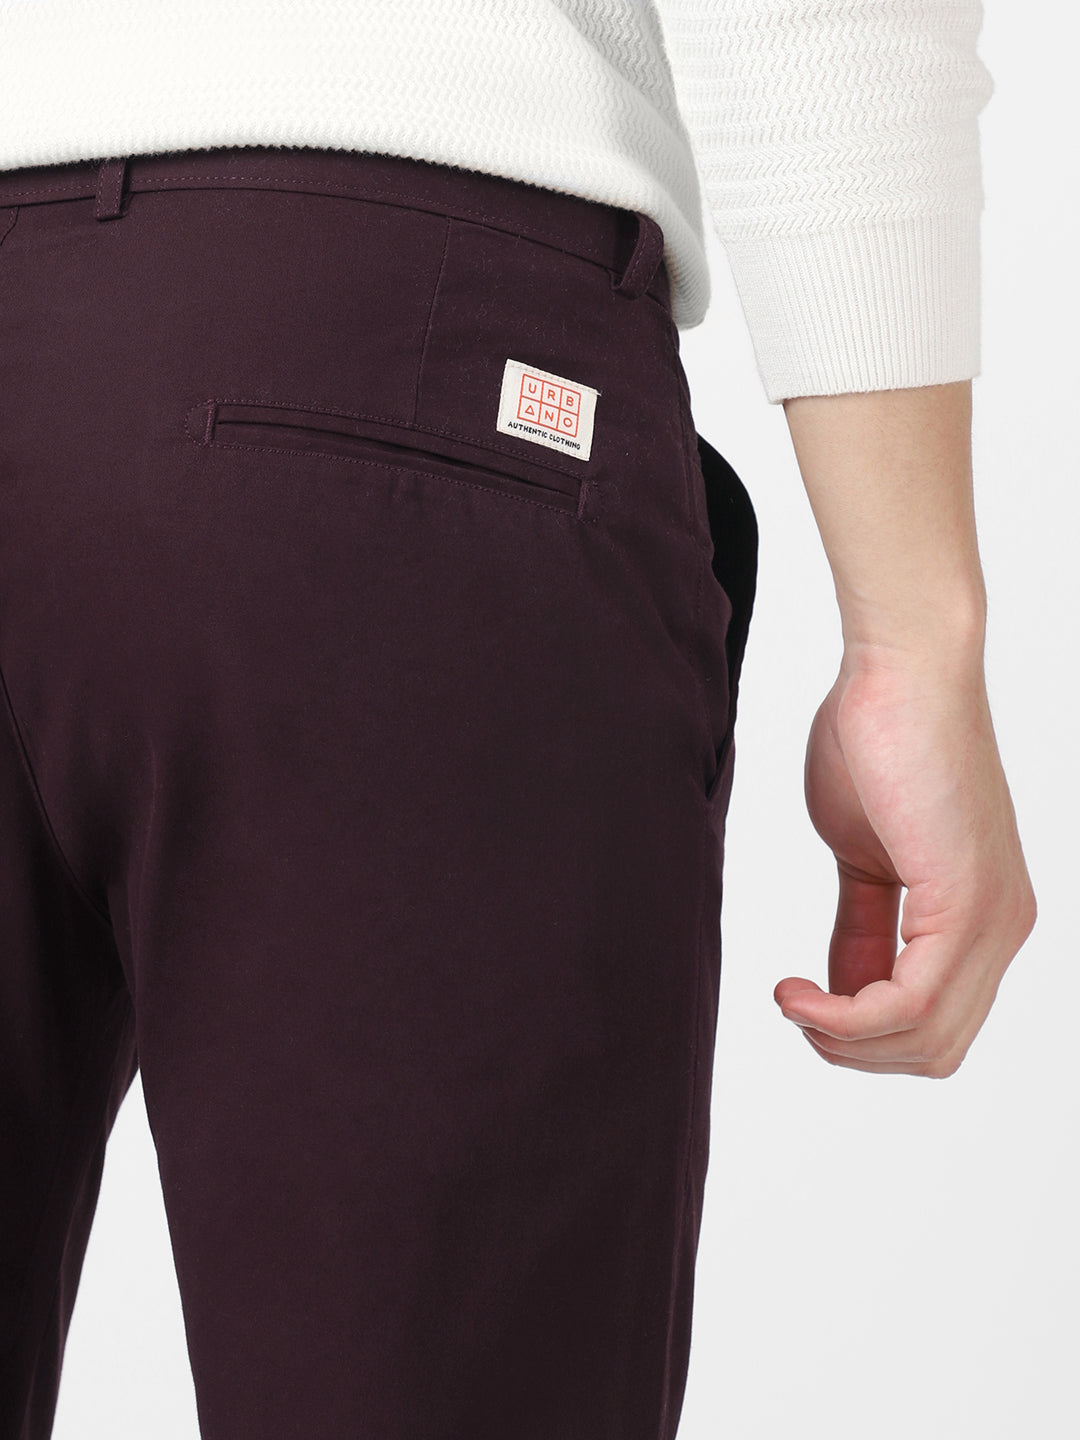 Men's Maroon Cotton Light Weight Non-Stretch Slim Fit Casual Trousers